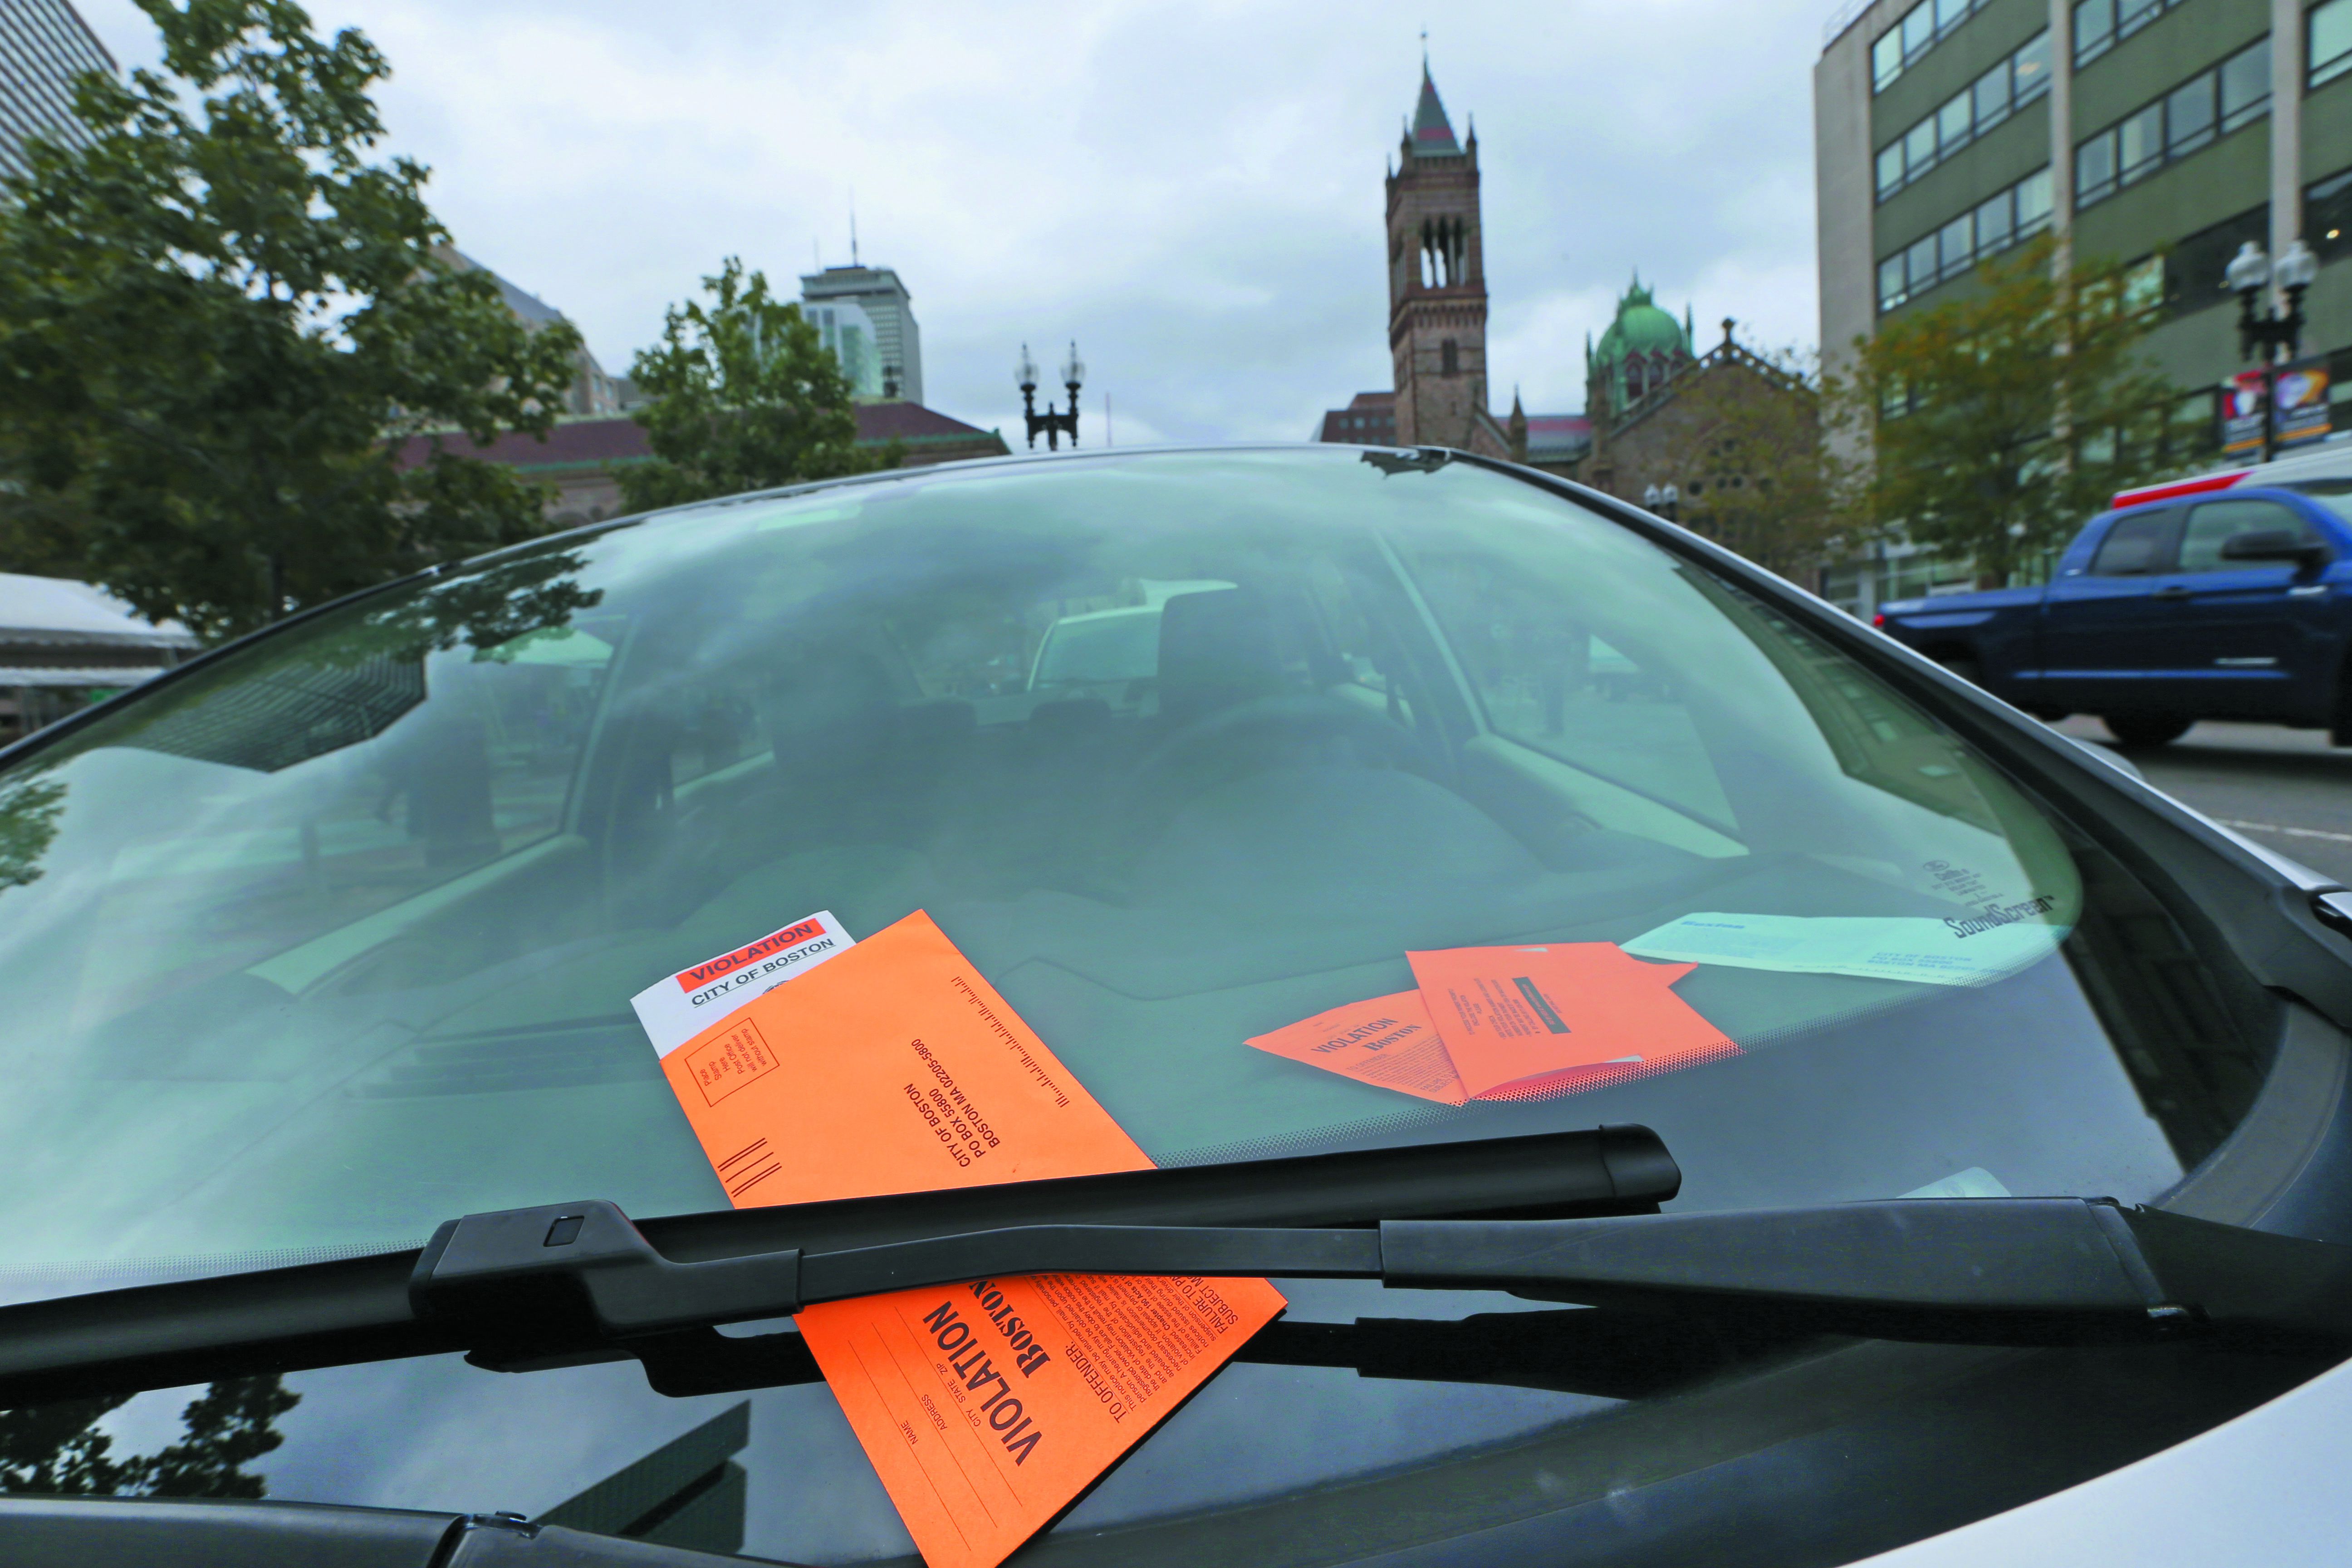 The Insider's Guide to Getting Out of a Parking Ticket in Boston